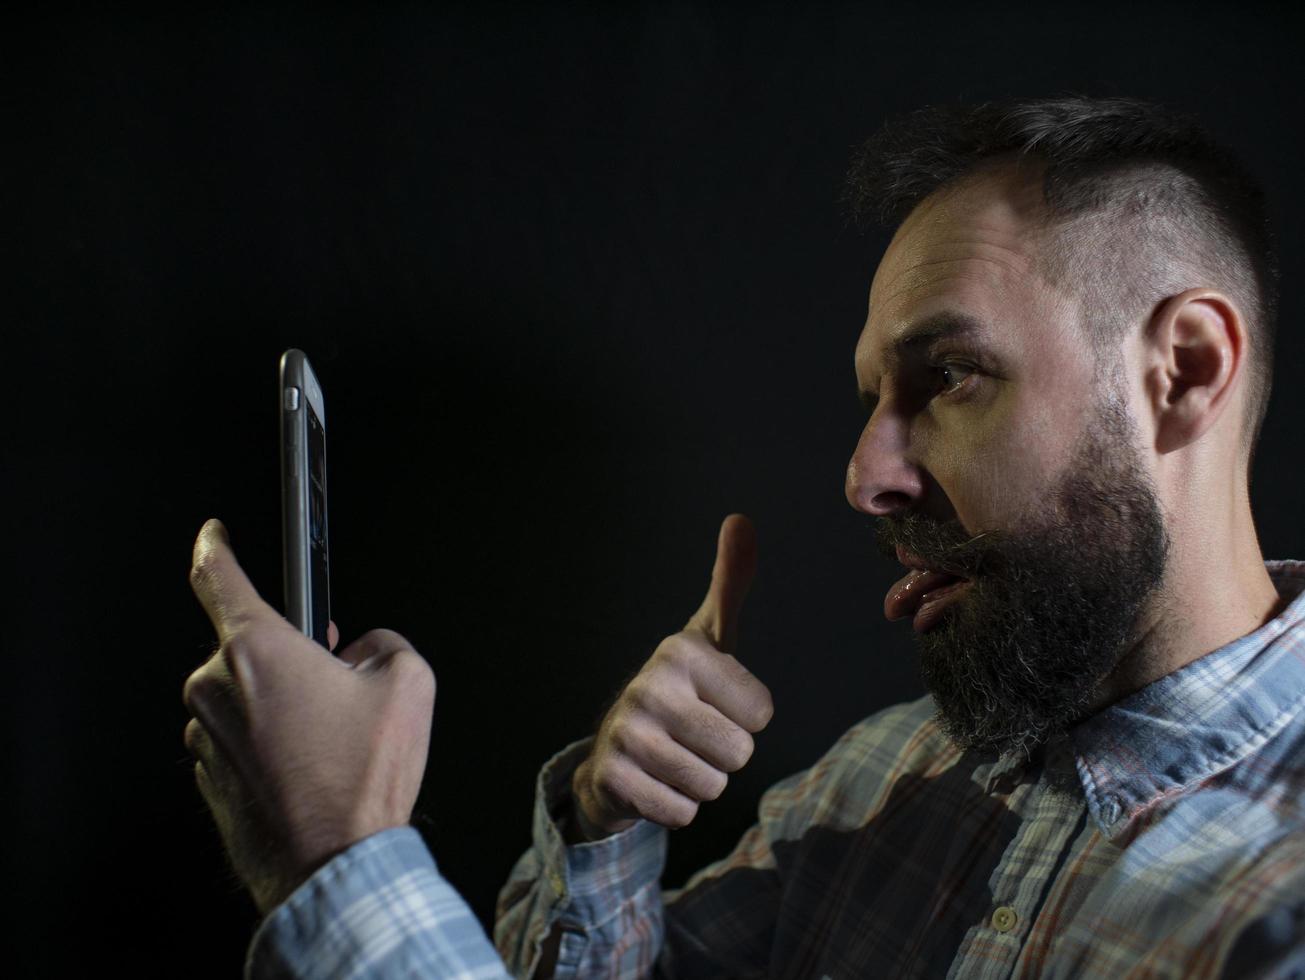 fashionable man with a beard grimaces and takes a selfie on the phone photo